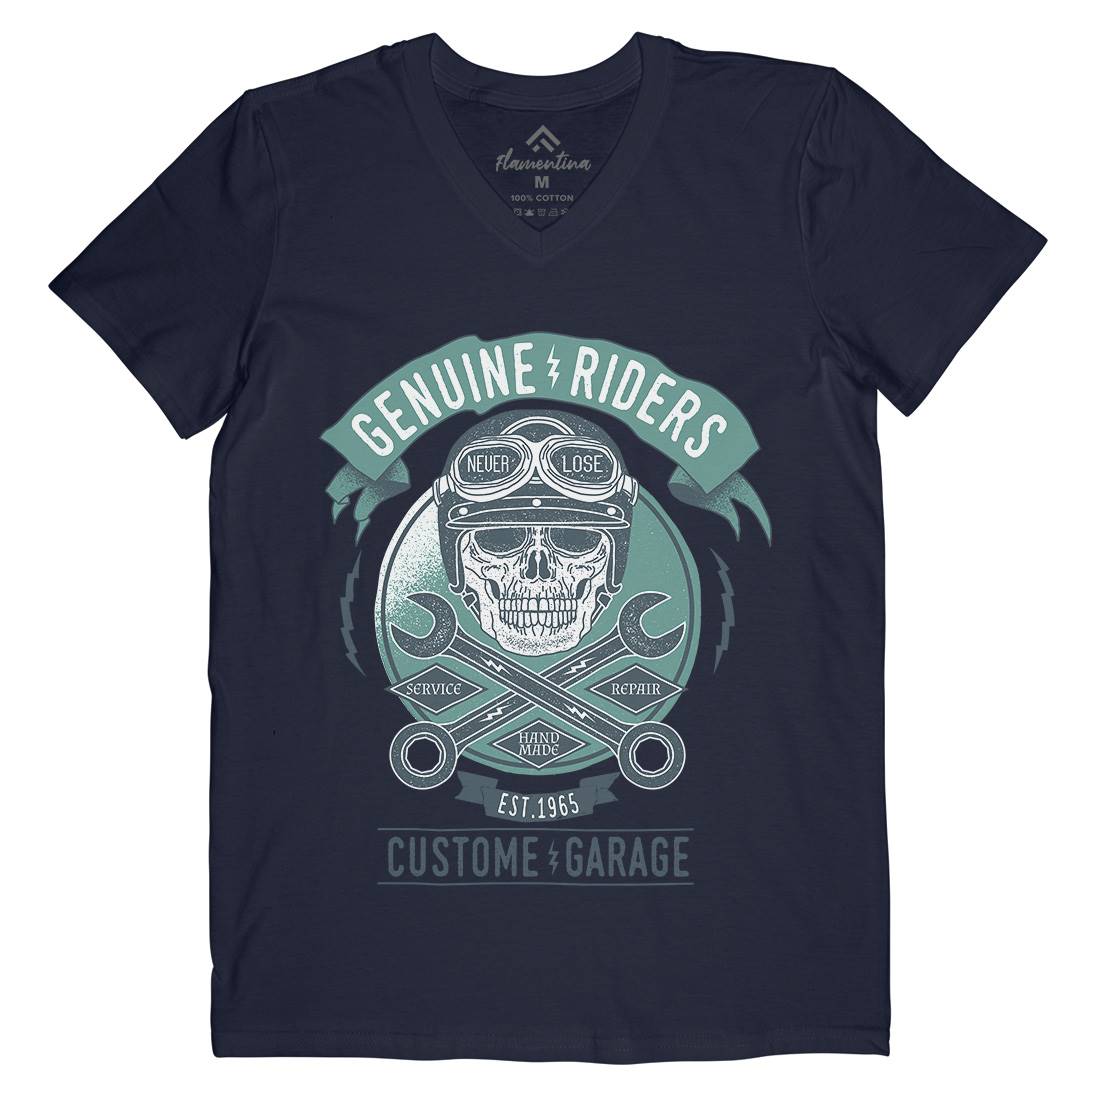 Genuine Riders Mens V-Neck T-Shirt Motorcycles A984